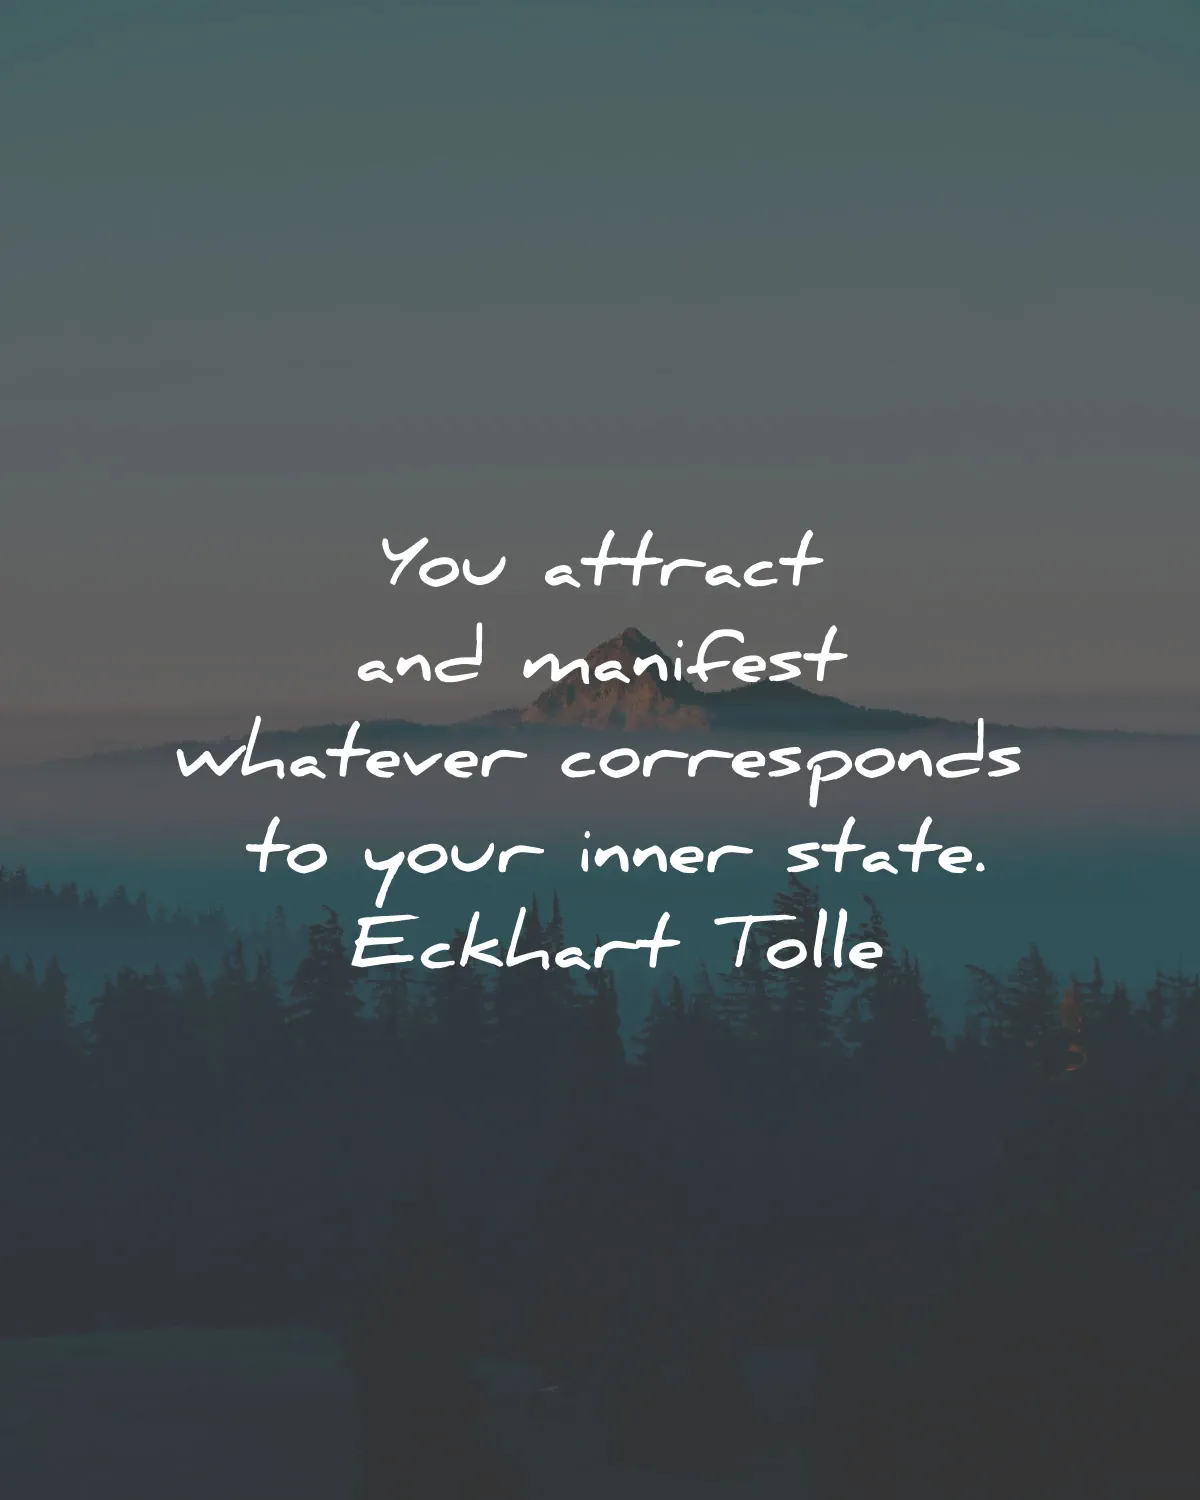 the power of now quotes summary eckhart tolle attract manifest inner state wisdom